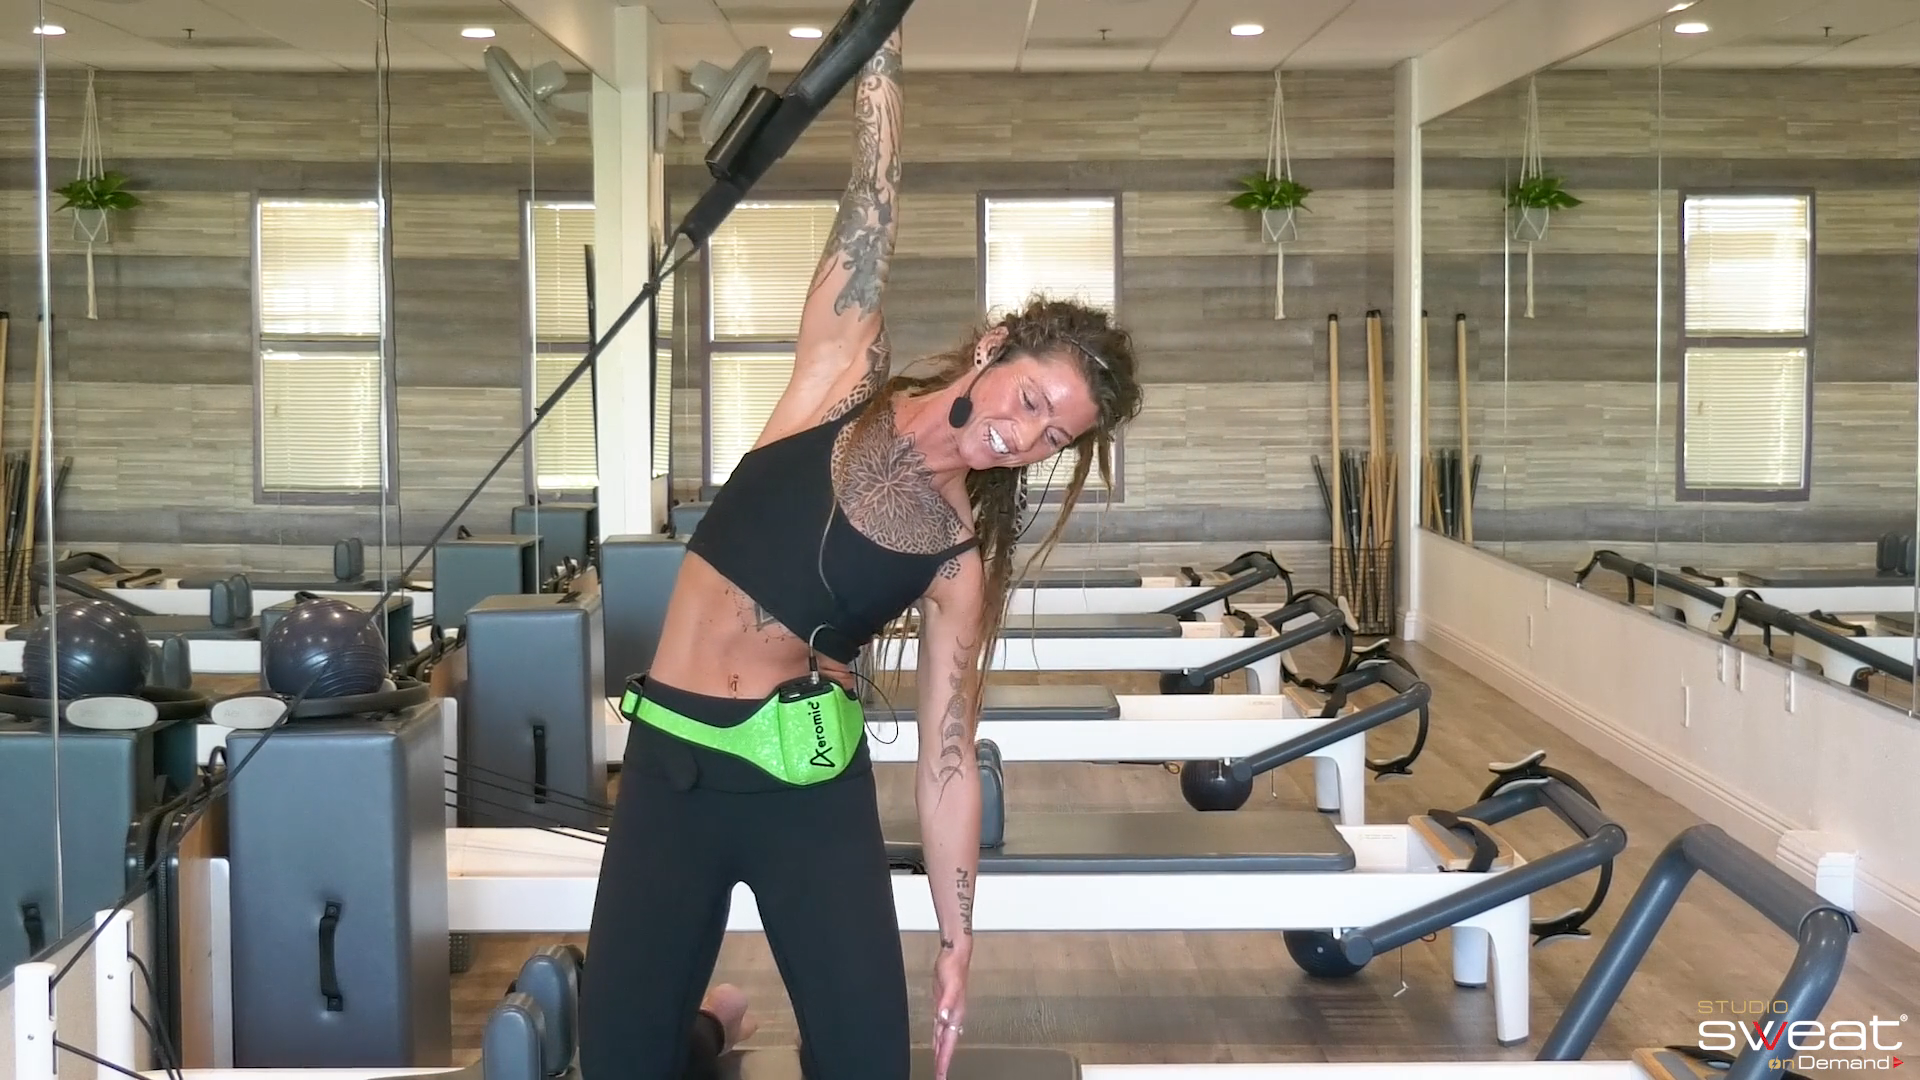 Forget the reformer — these 3 Pilates exercises sculpt strong abs